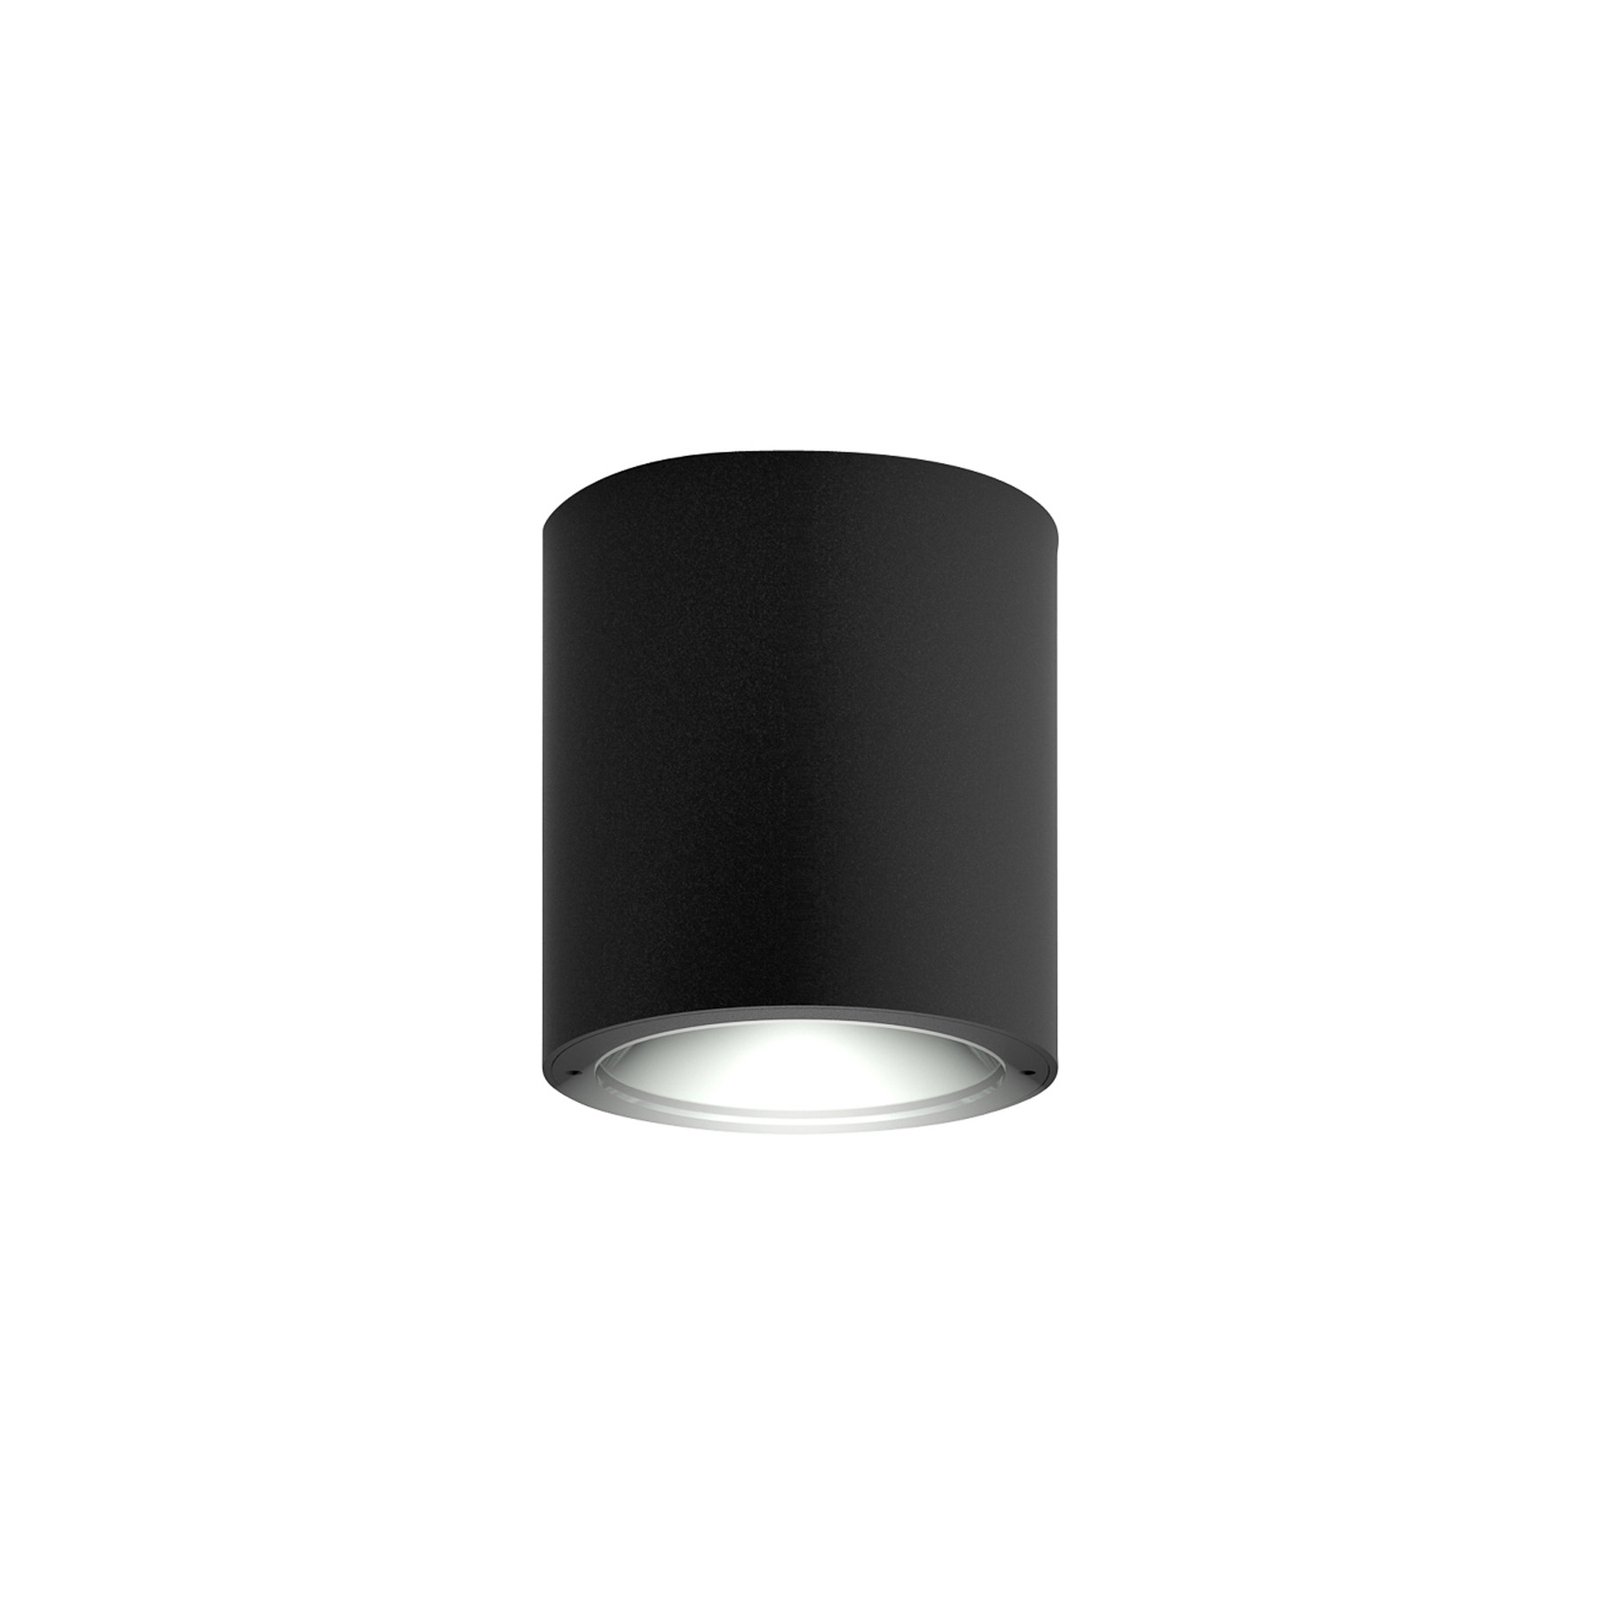 RZB HB 110 LED outdoor ceiling light round 830 17°